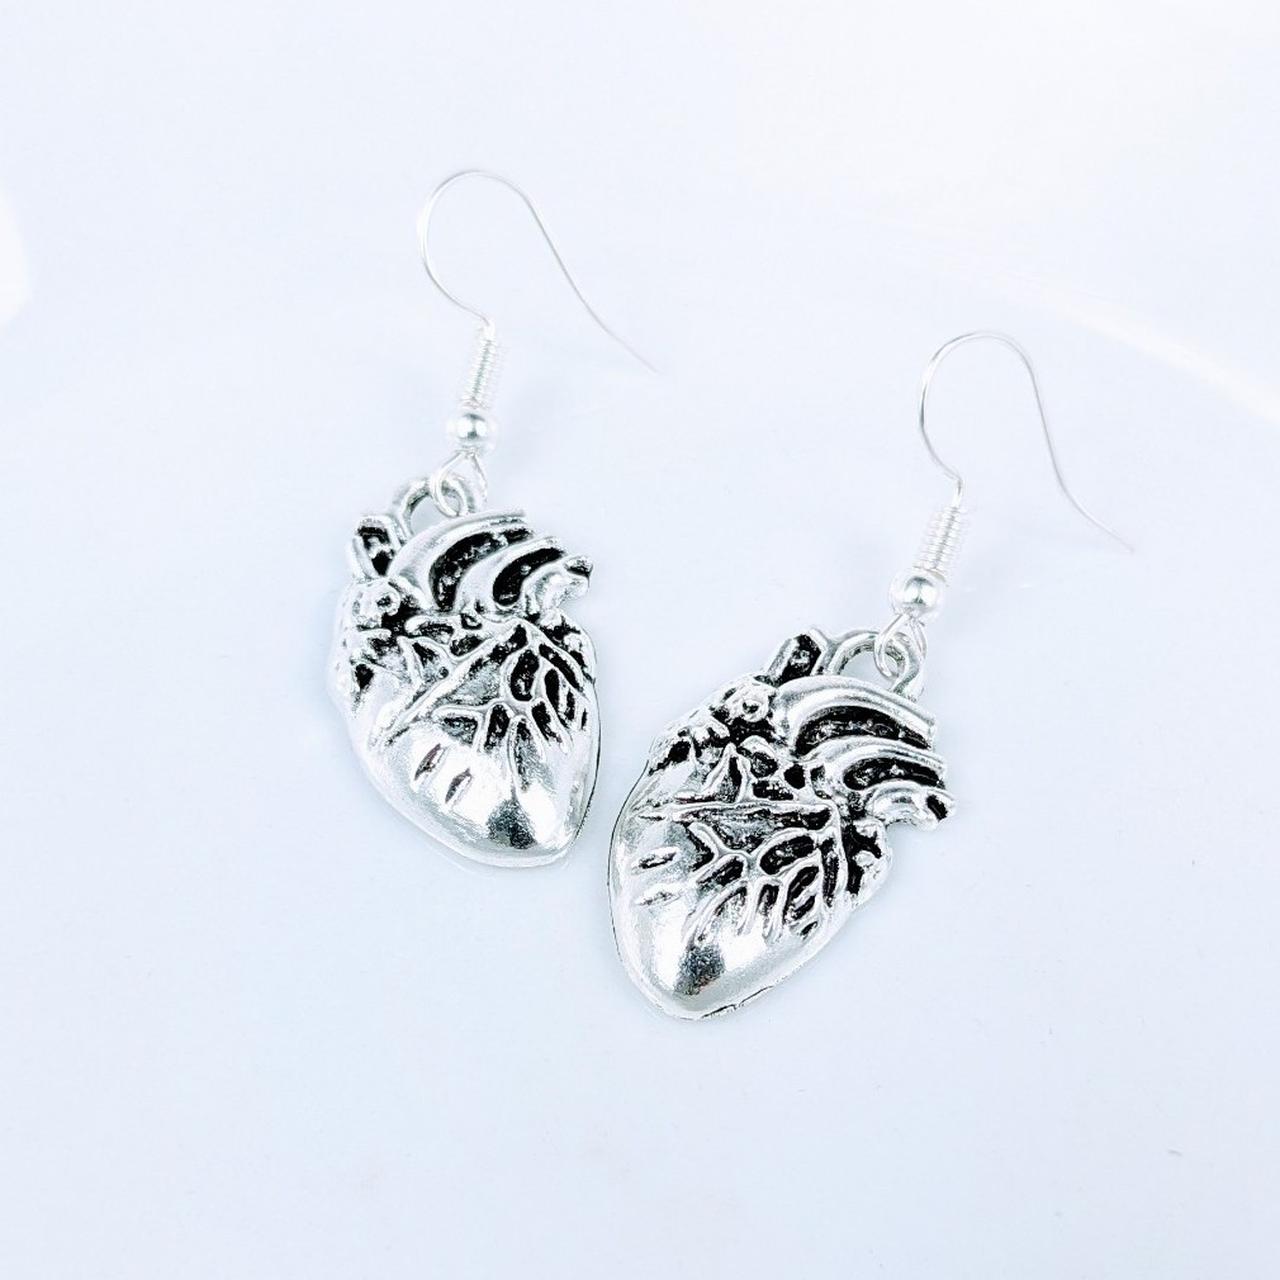 Product Image 1 - Anatomy Heart Earrings
Brand new. 

Made